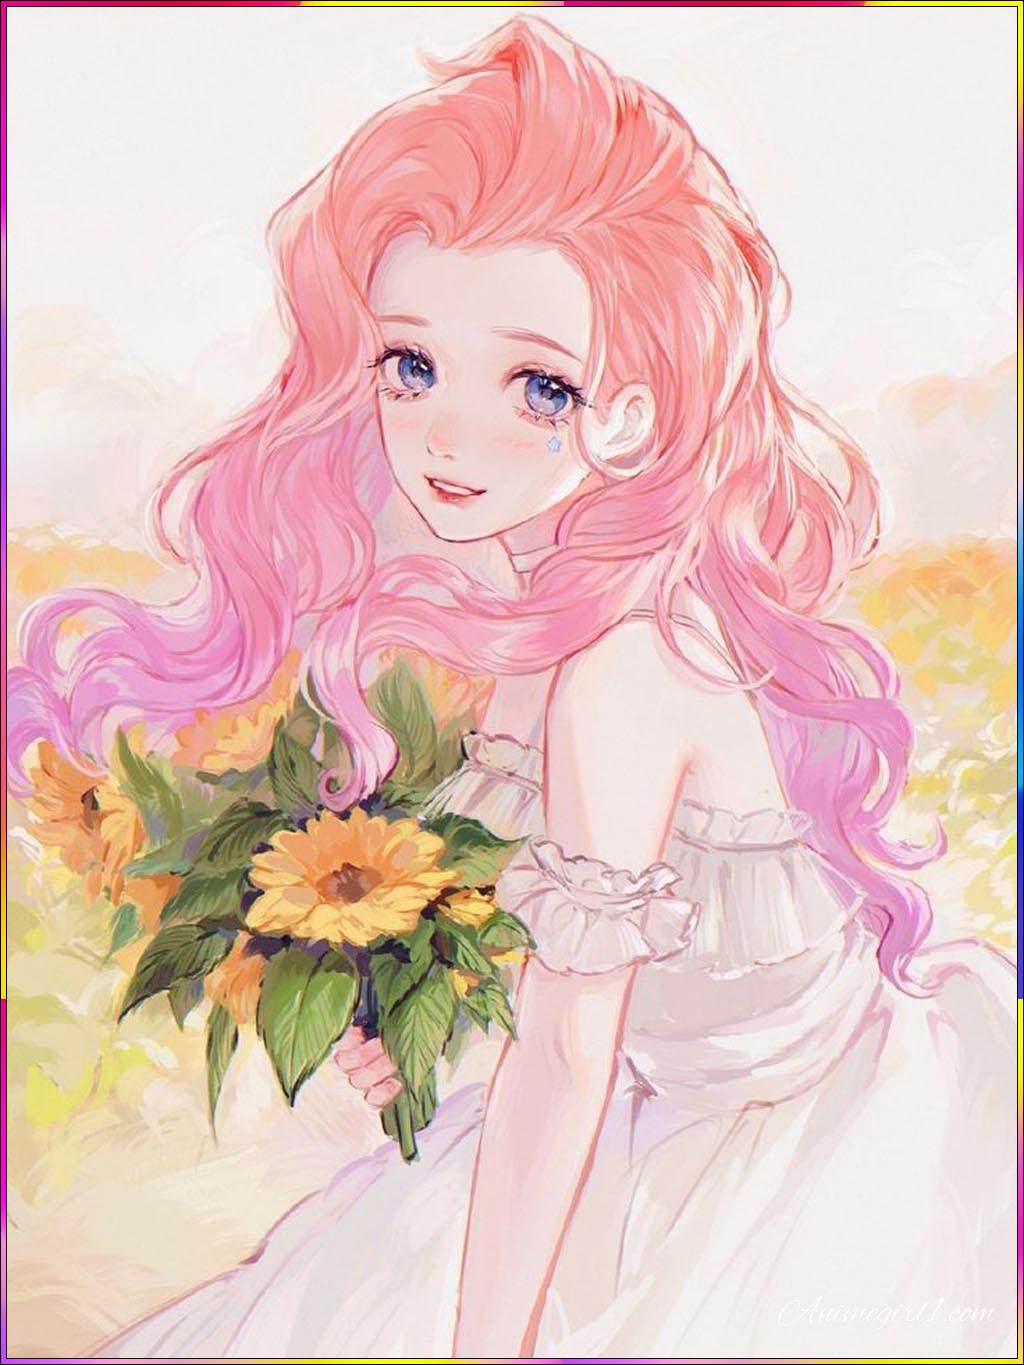 anime girl with pink hair and flowers